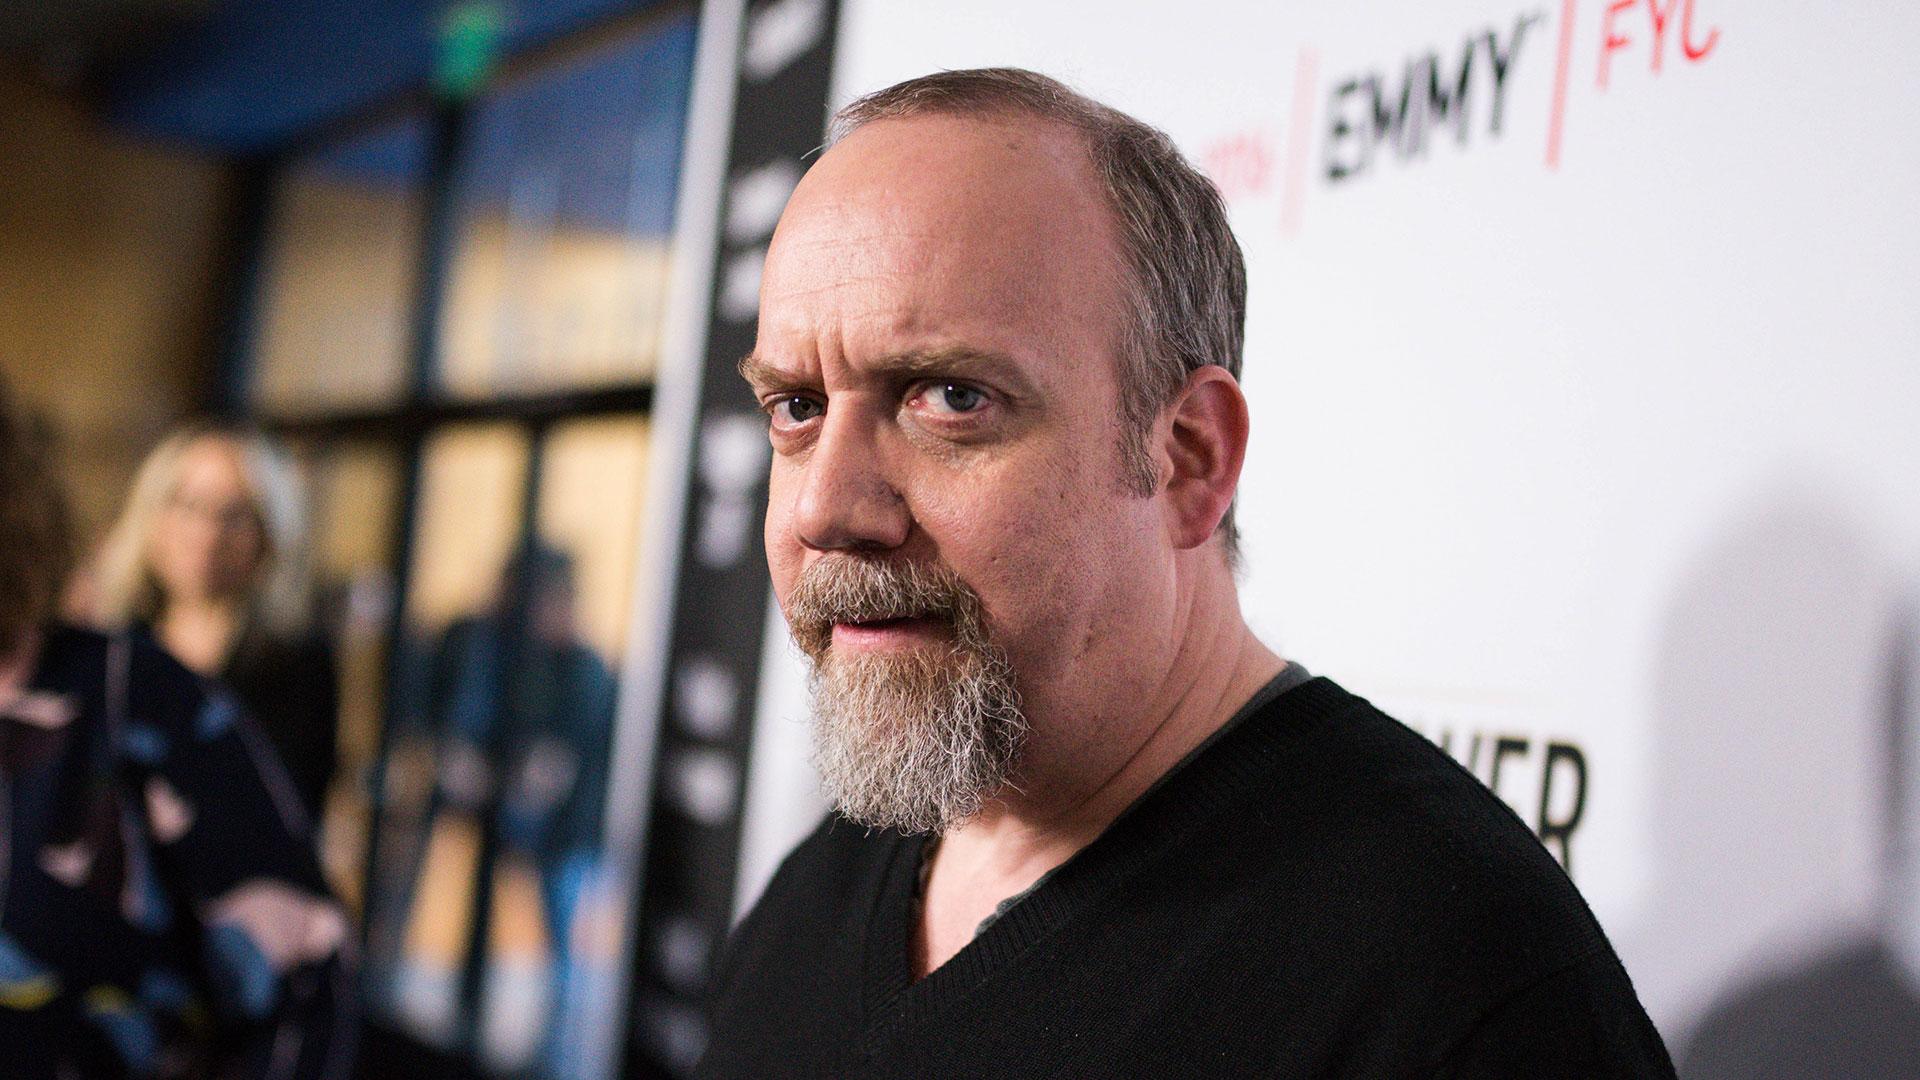 Paul Giamatti: Acting is harder than I thought it would be